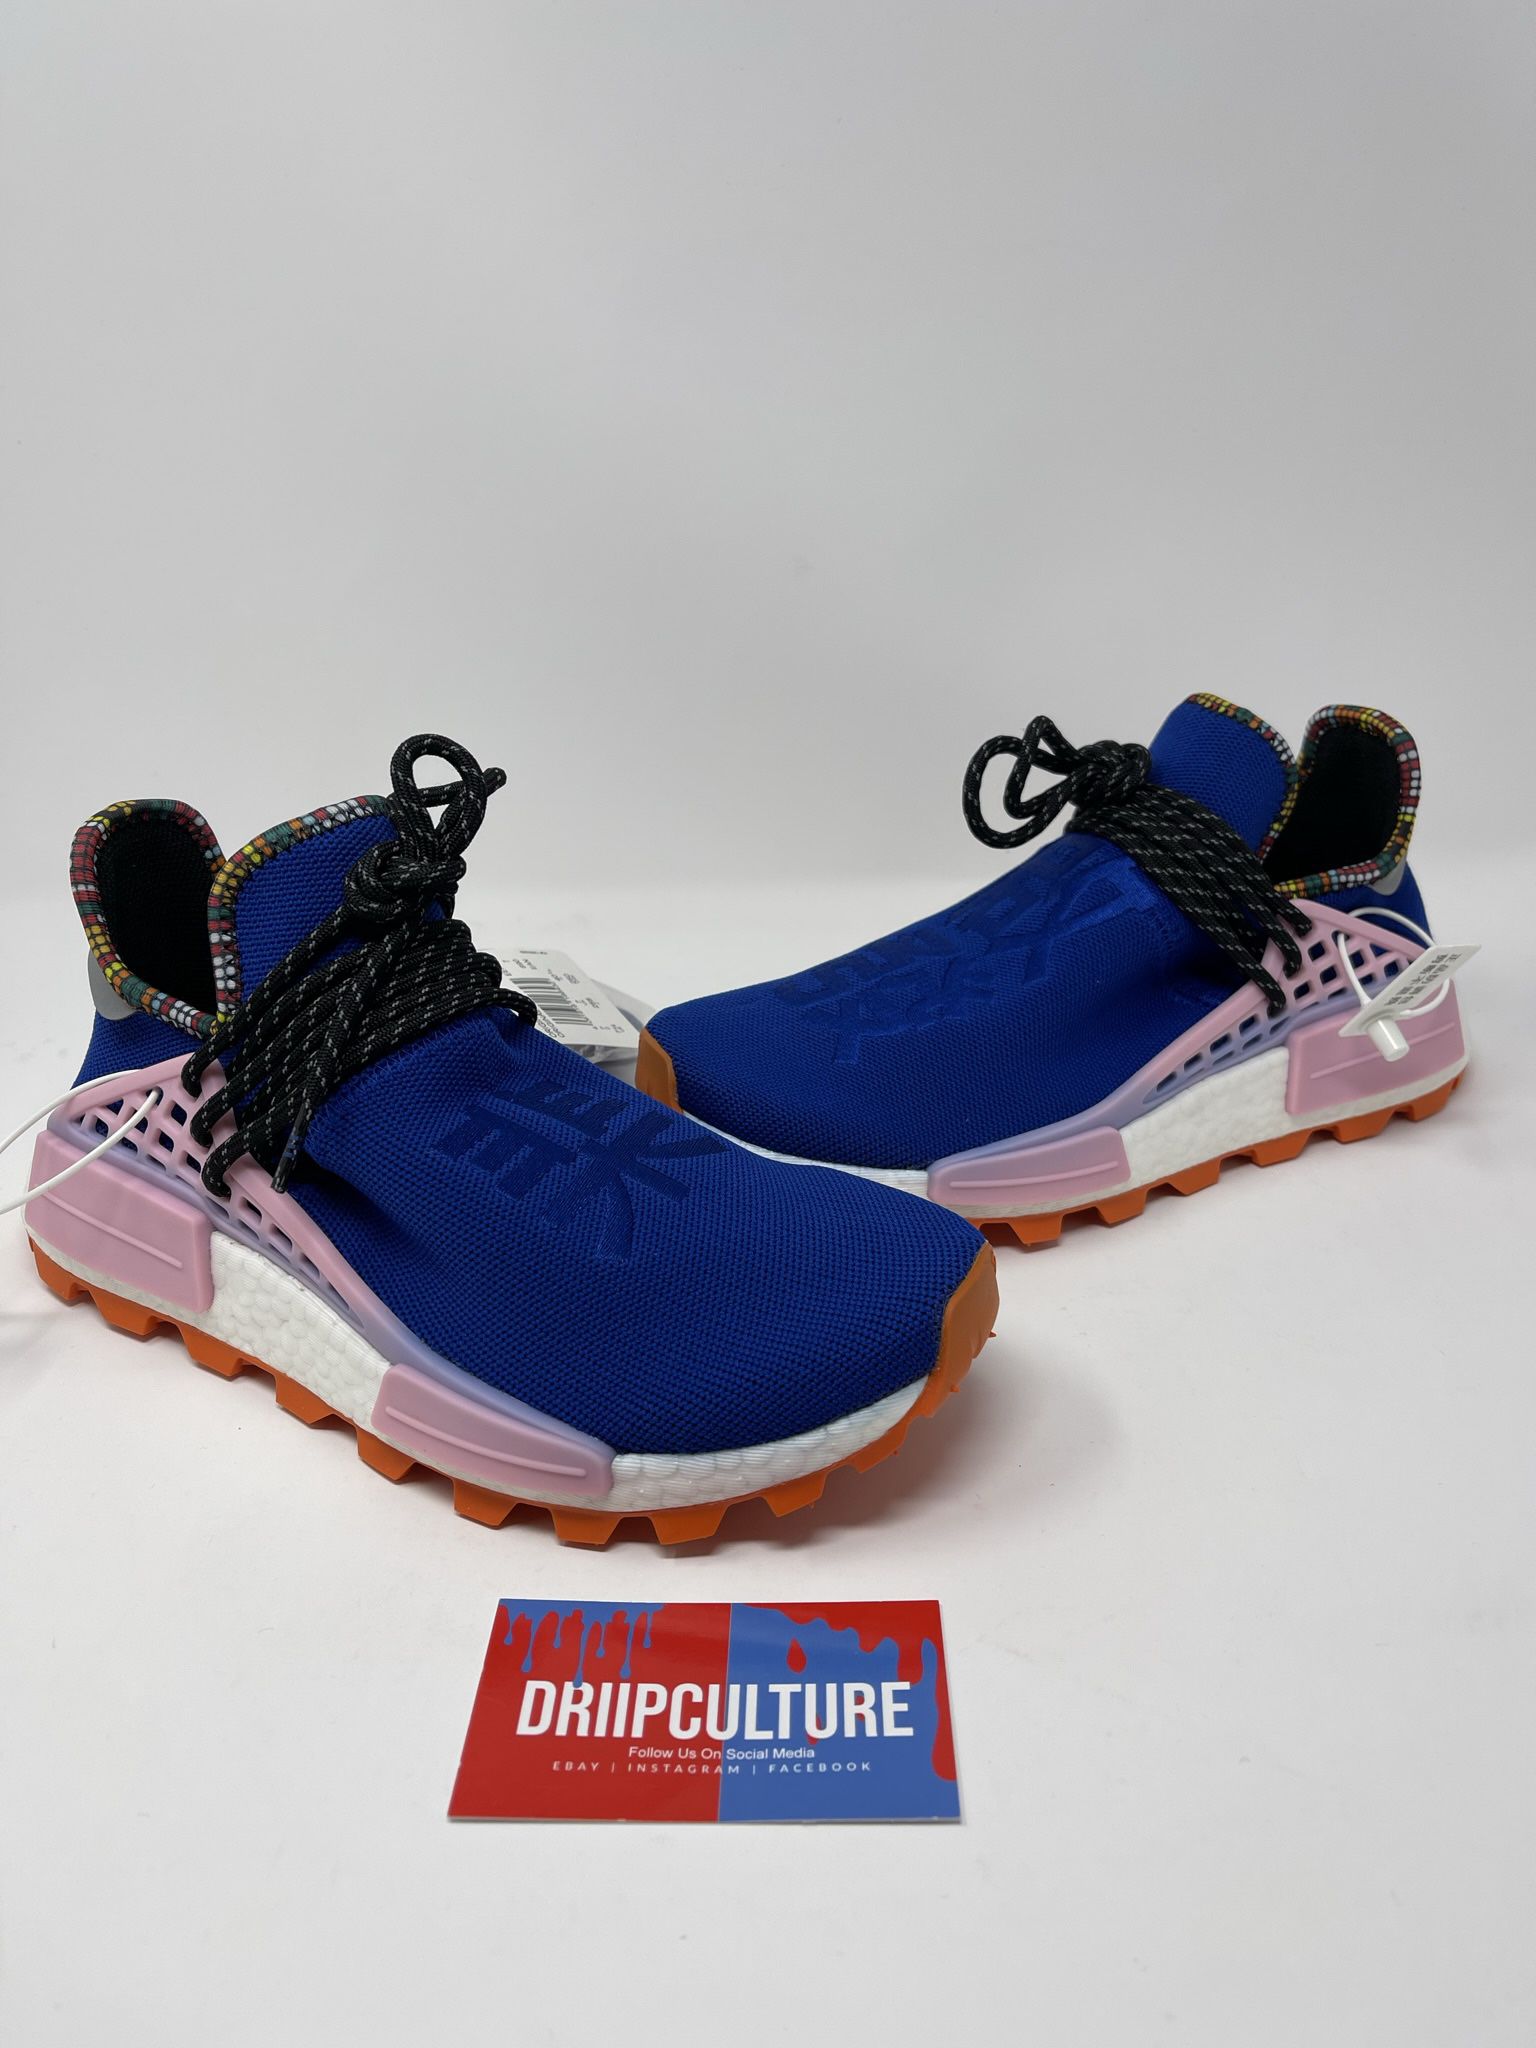 Adidas Pharrell Williams Solar HU NMD Pack" EE7579 7.5 New for Sale in Everett, WA - OfferUp